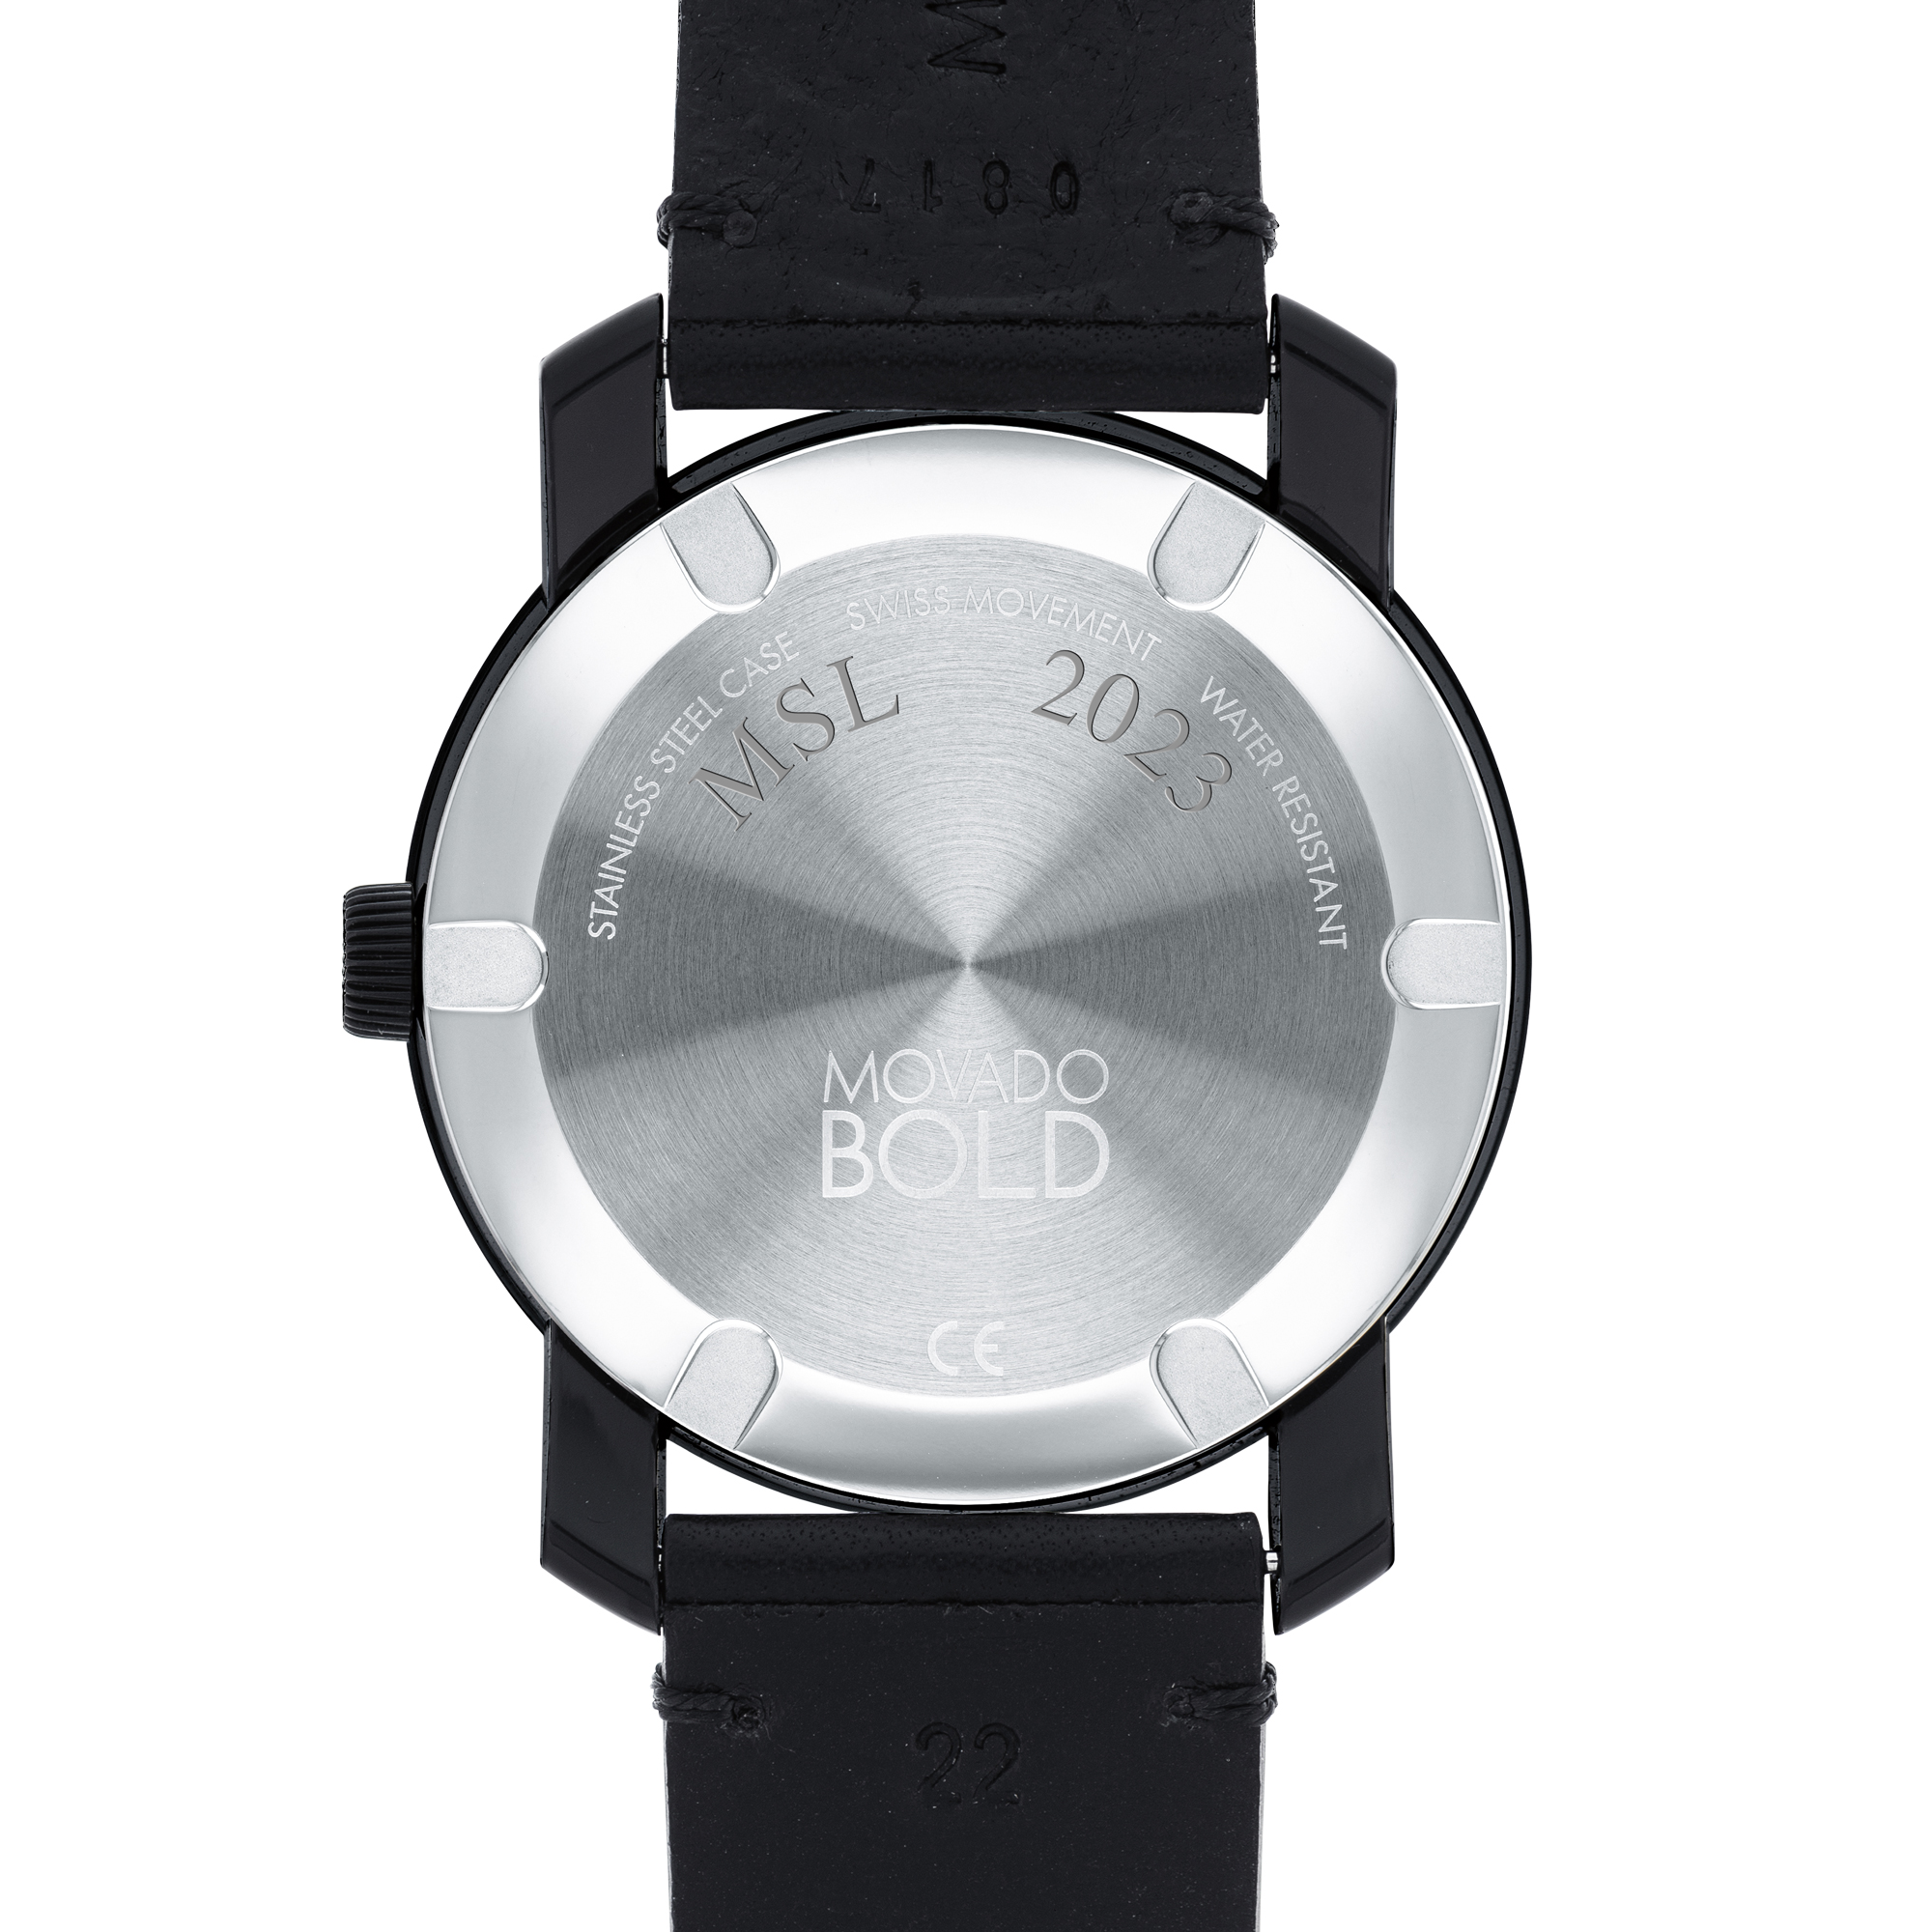 Troy Men's Movado BOLD with Leather Strap - Image 3